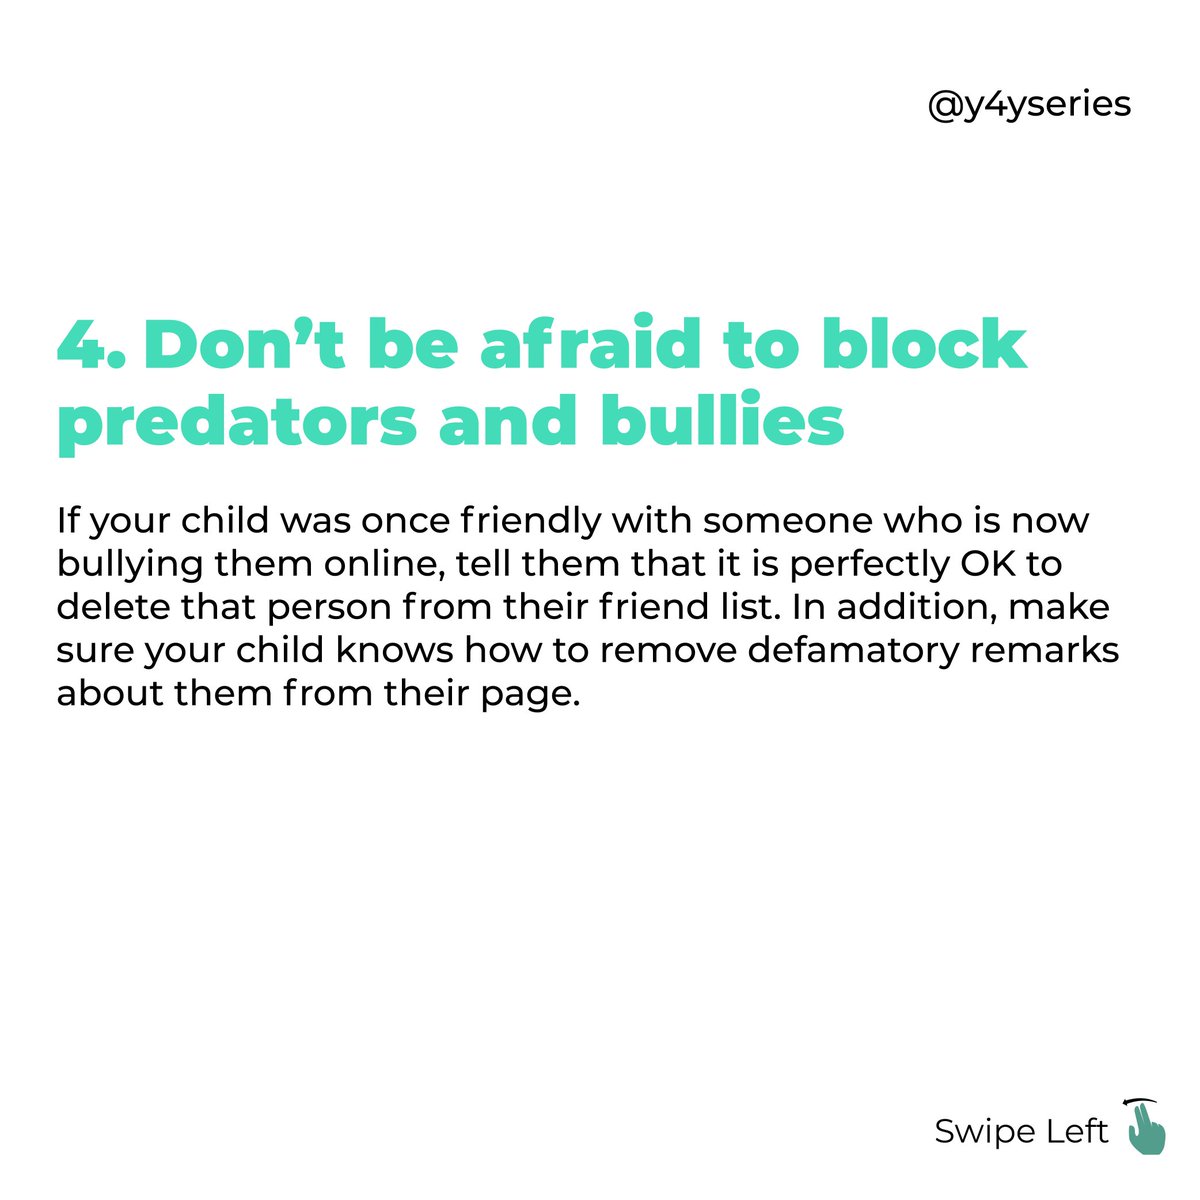 Don’t be afraid to block predators and bullies:⁣If your child was once friendly with someone who is now bullying them online, tell them that it is perfectly OK to delete that person from their friend list.